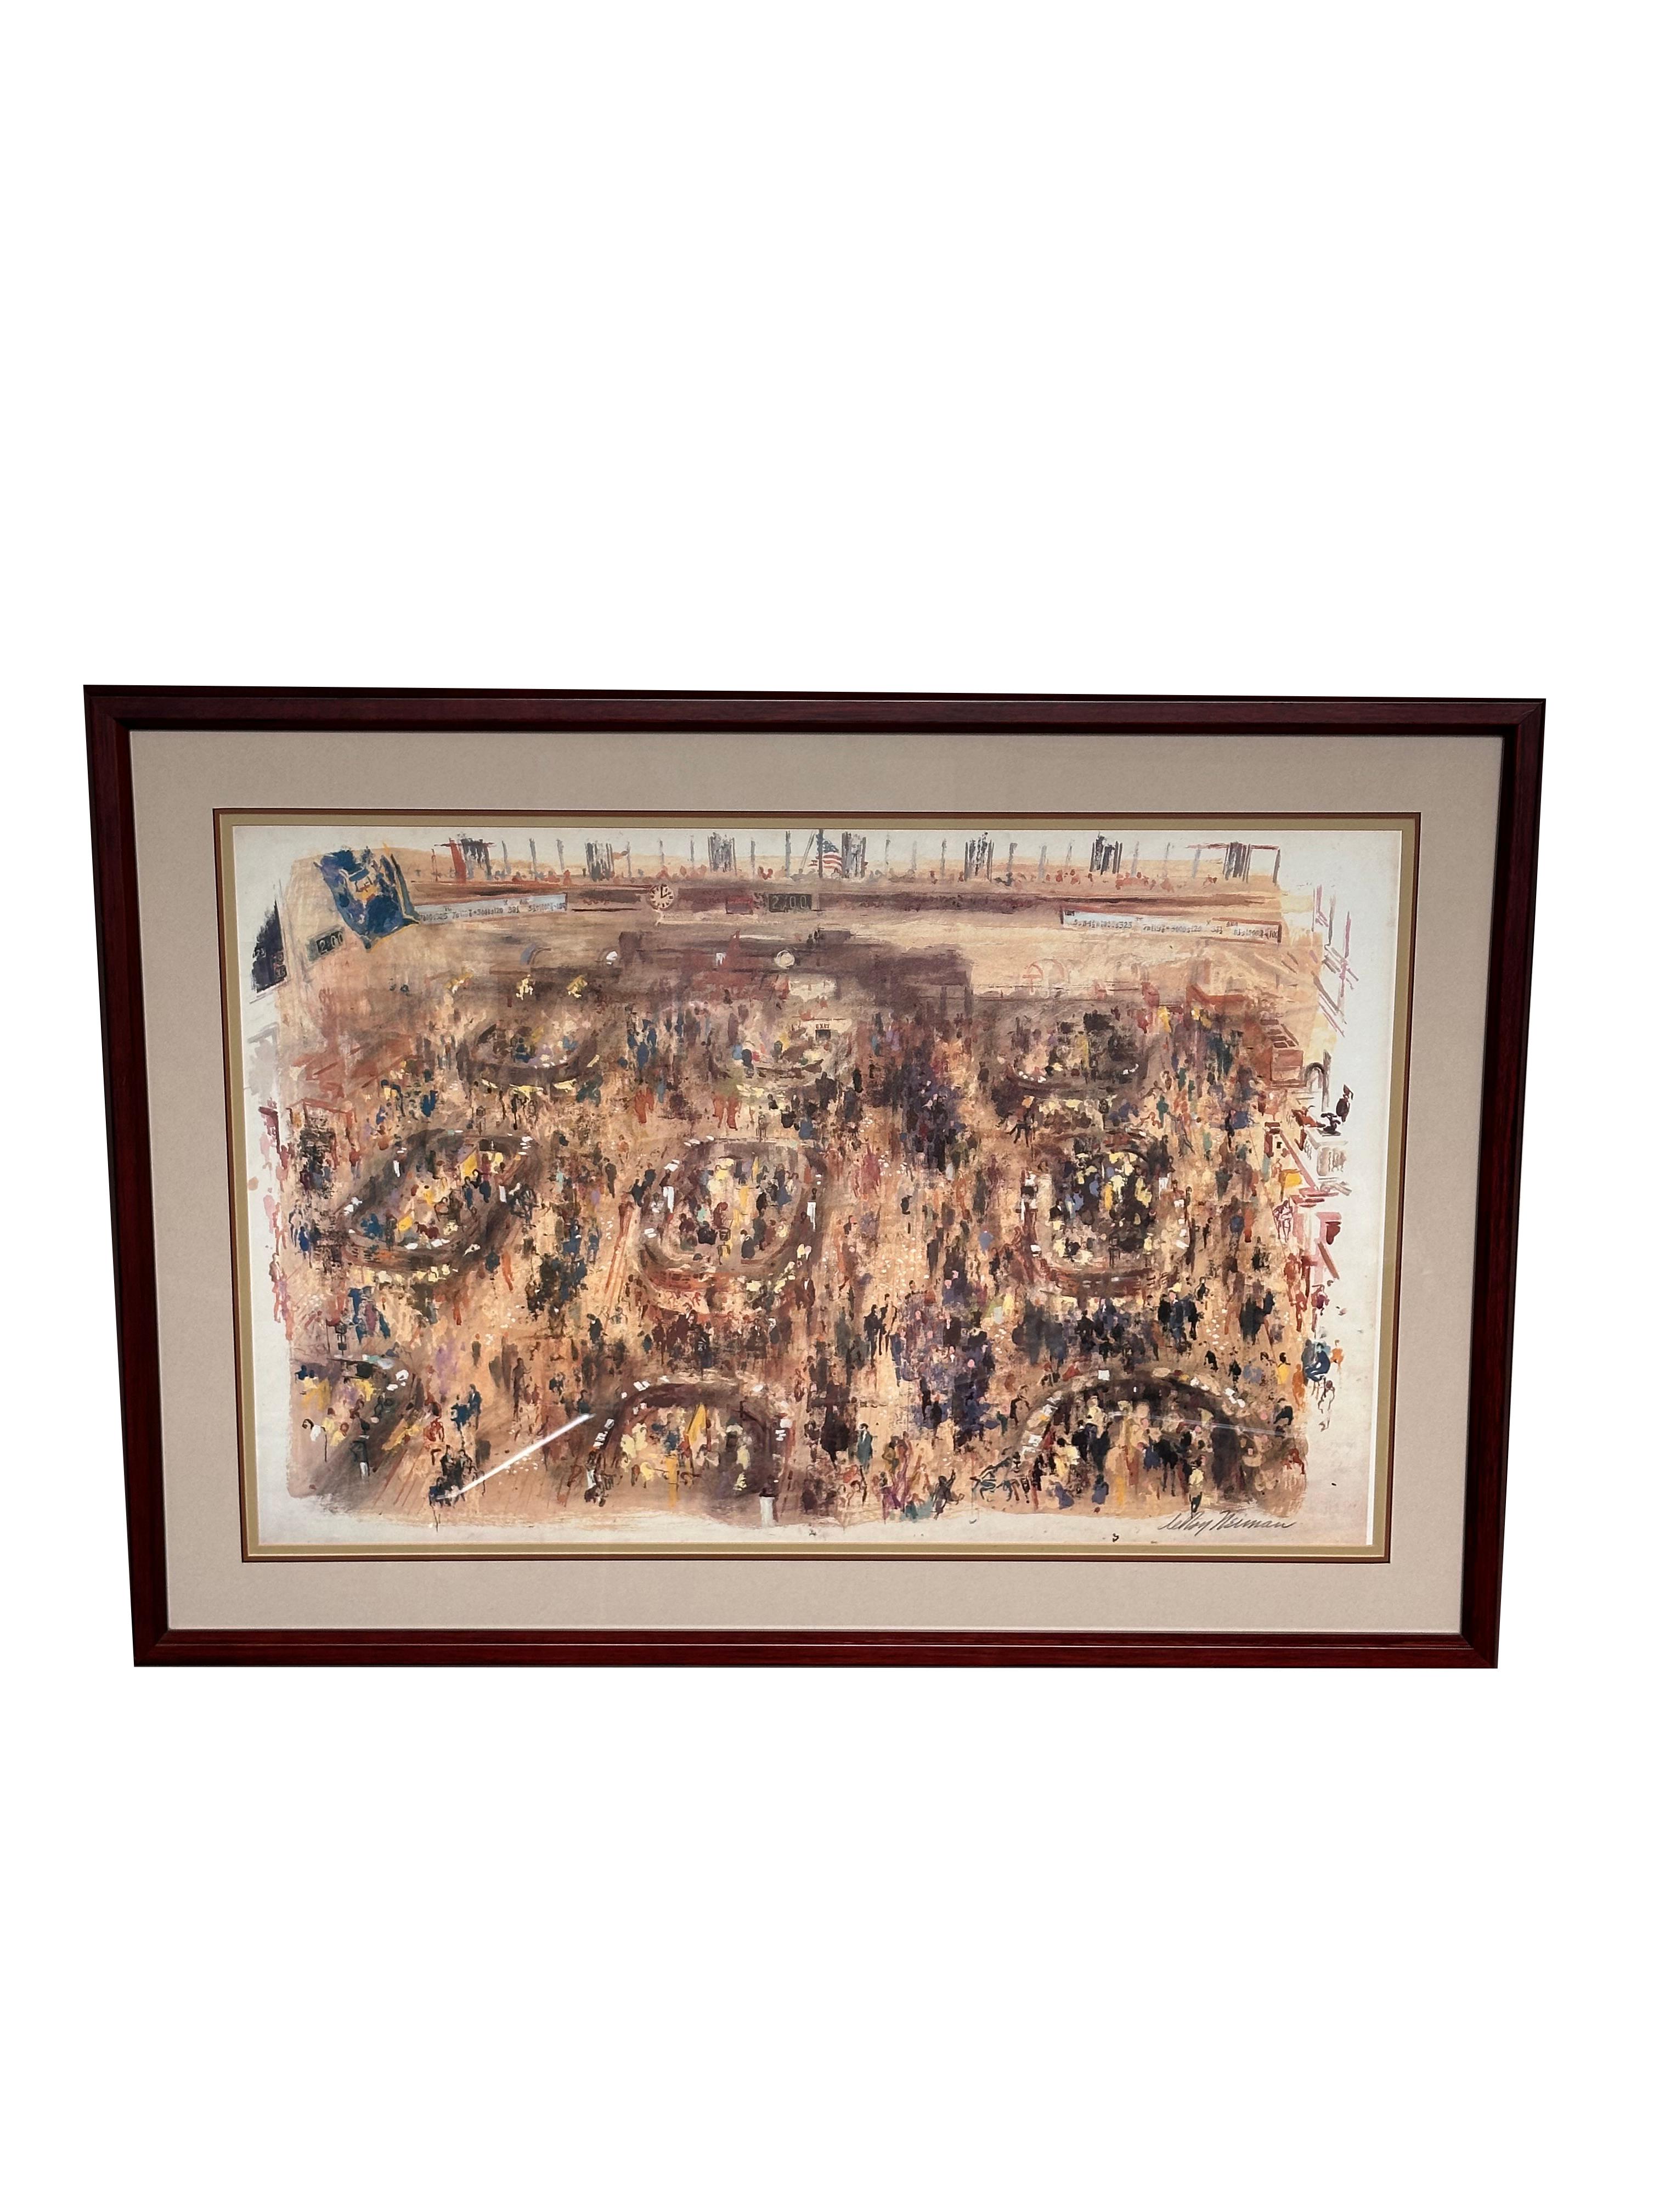 New York Stock Exchange Lithograph by LeRoy Neiman

This is a large scale, hand-signed offset lithograph depicting the floor of the
New York Stock Exchange by American artist LeRoy Neiman (1921-2012). The lithograph features figures at work at the